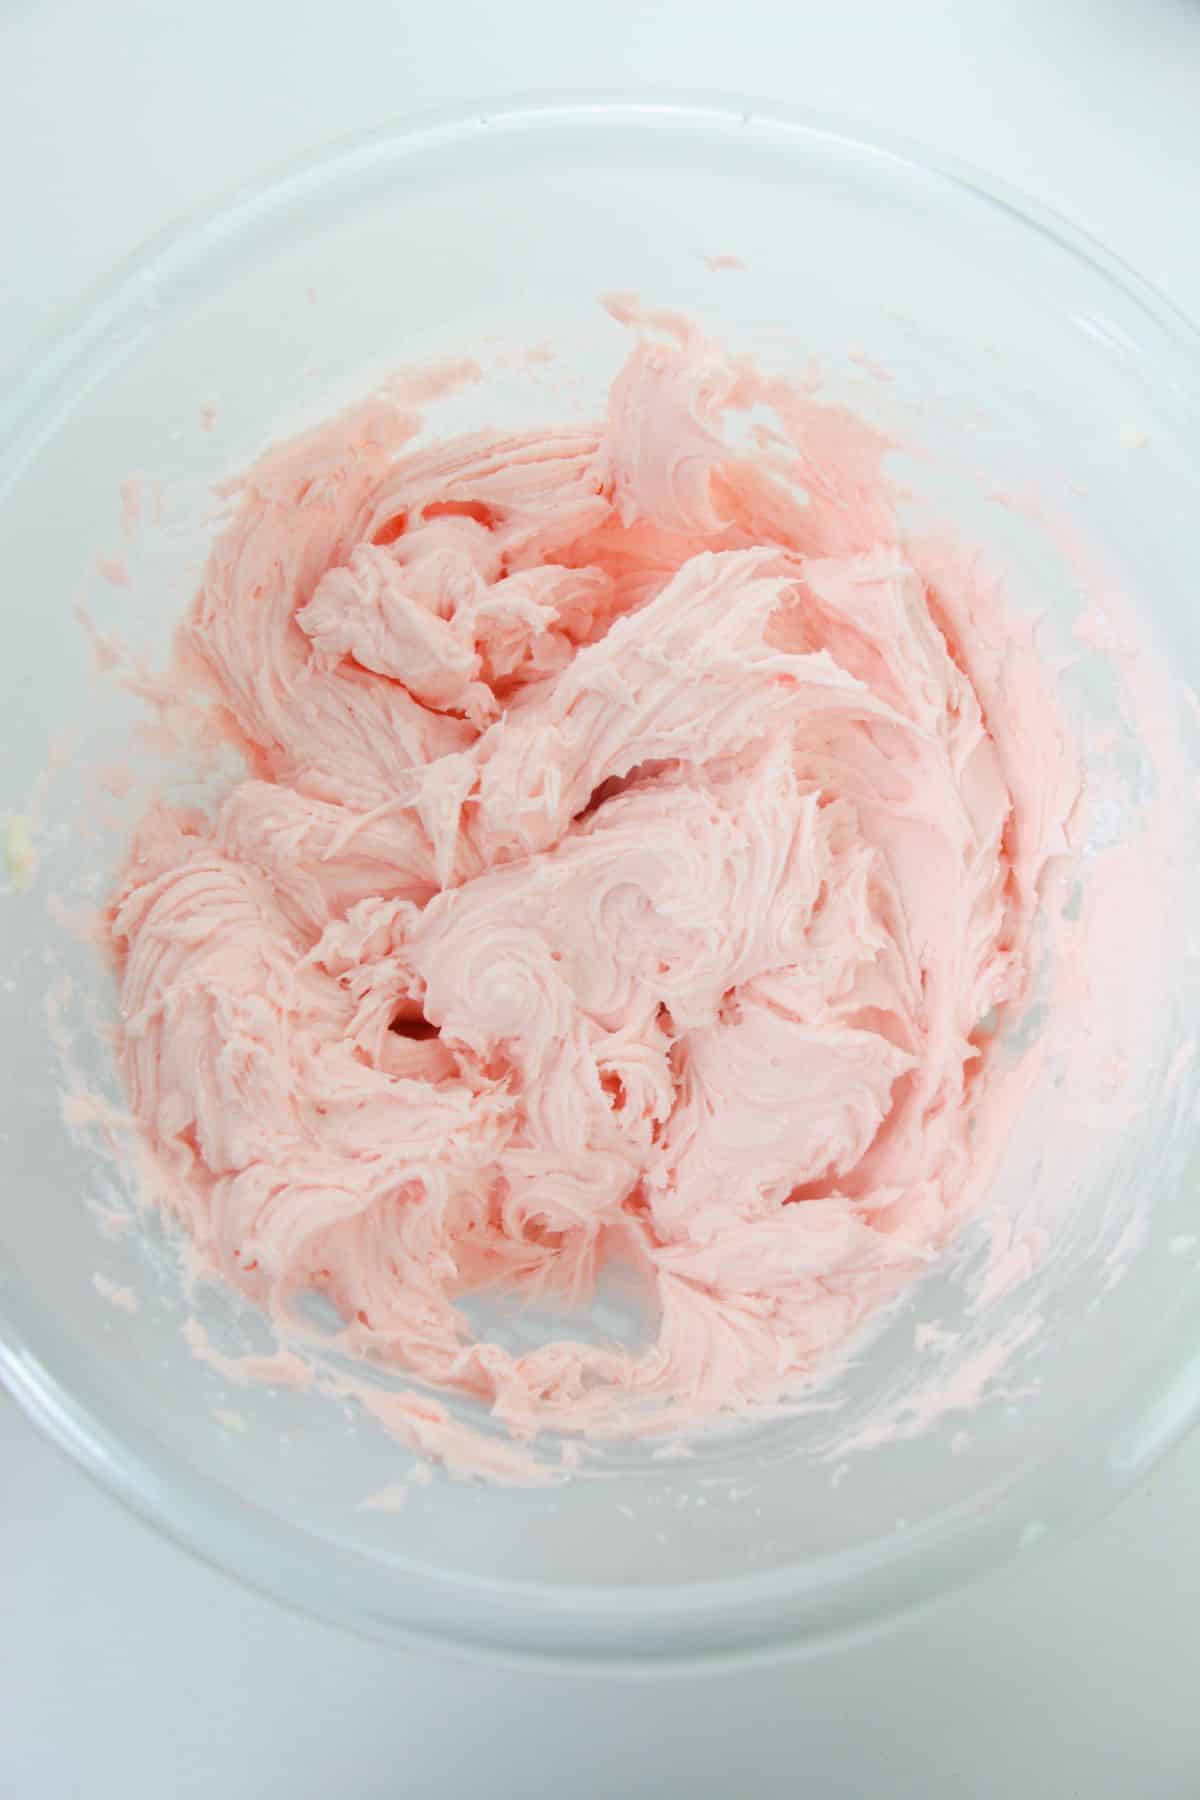 Milk and strawberry extract are added to the frosting mixture.